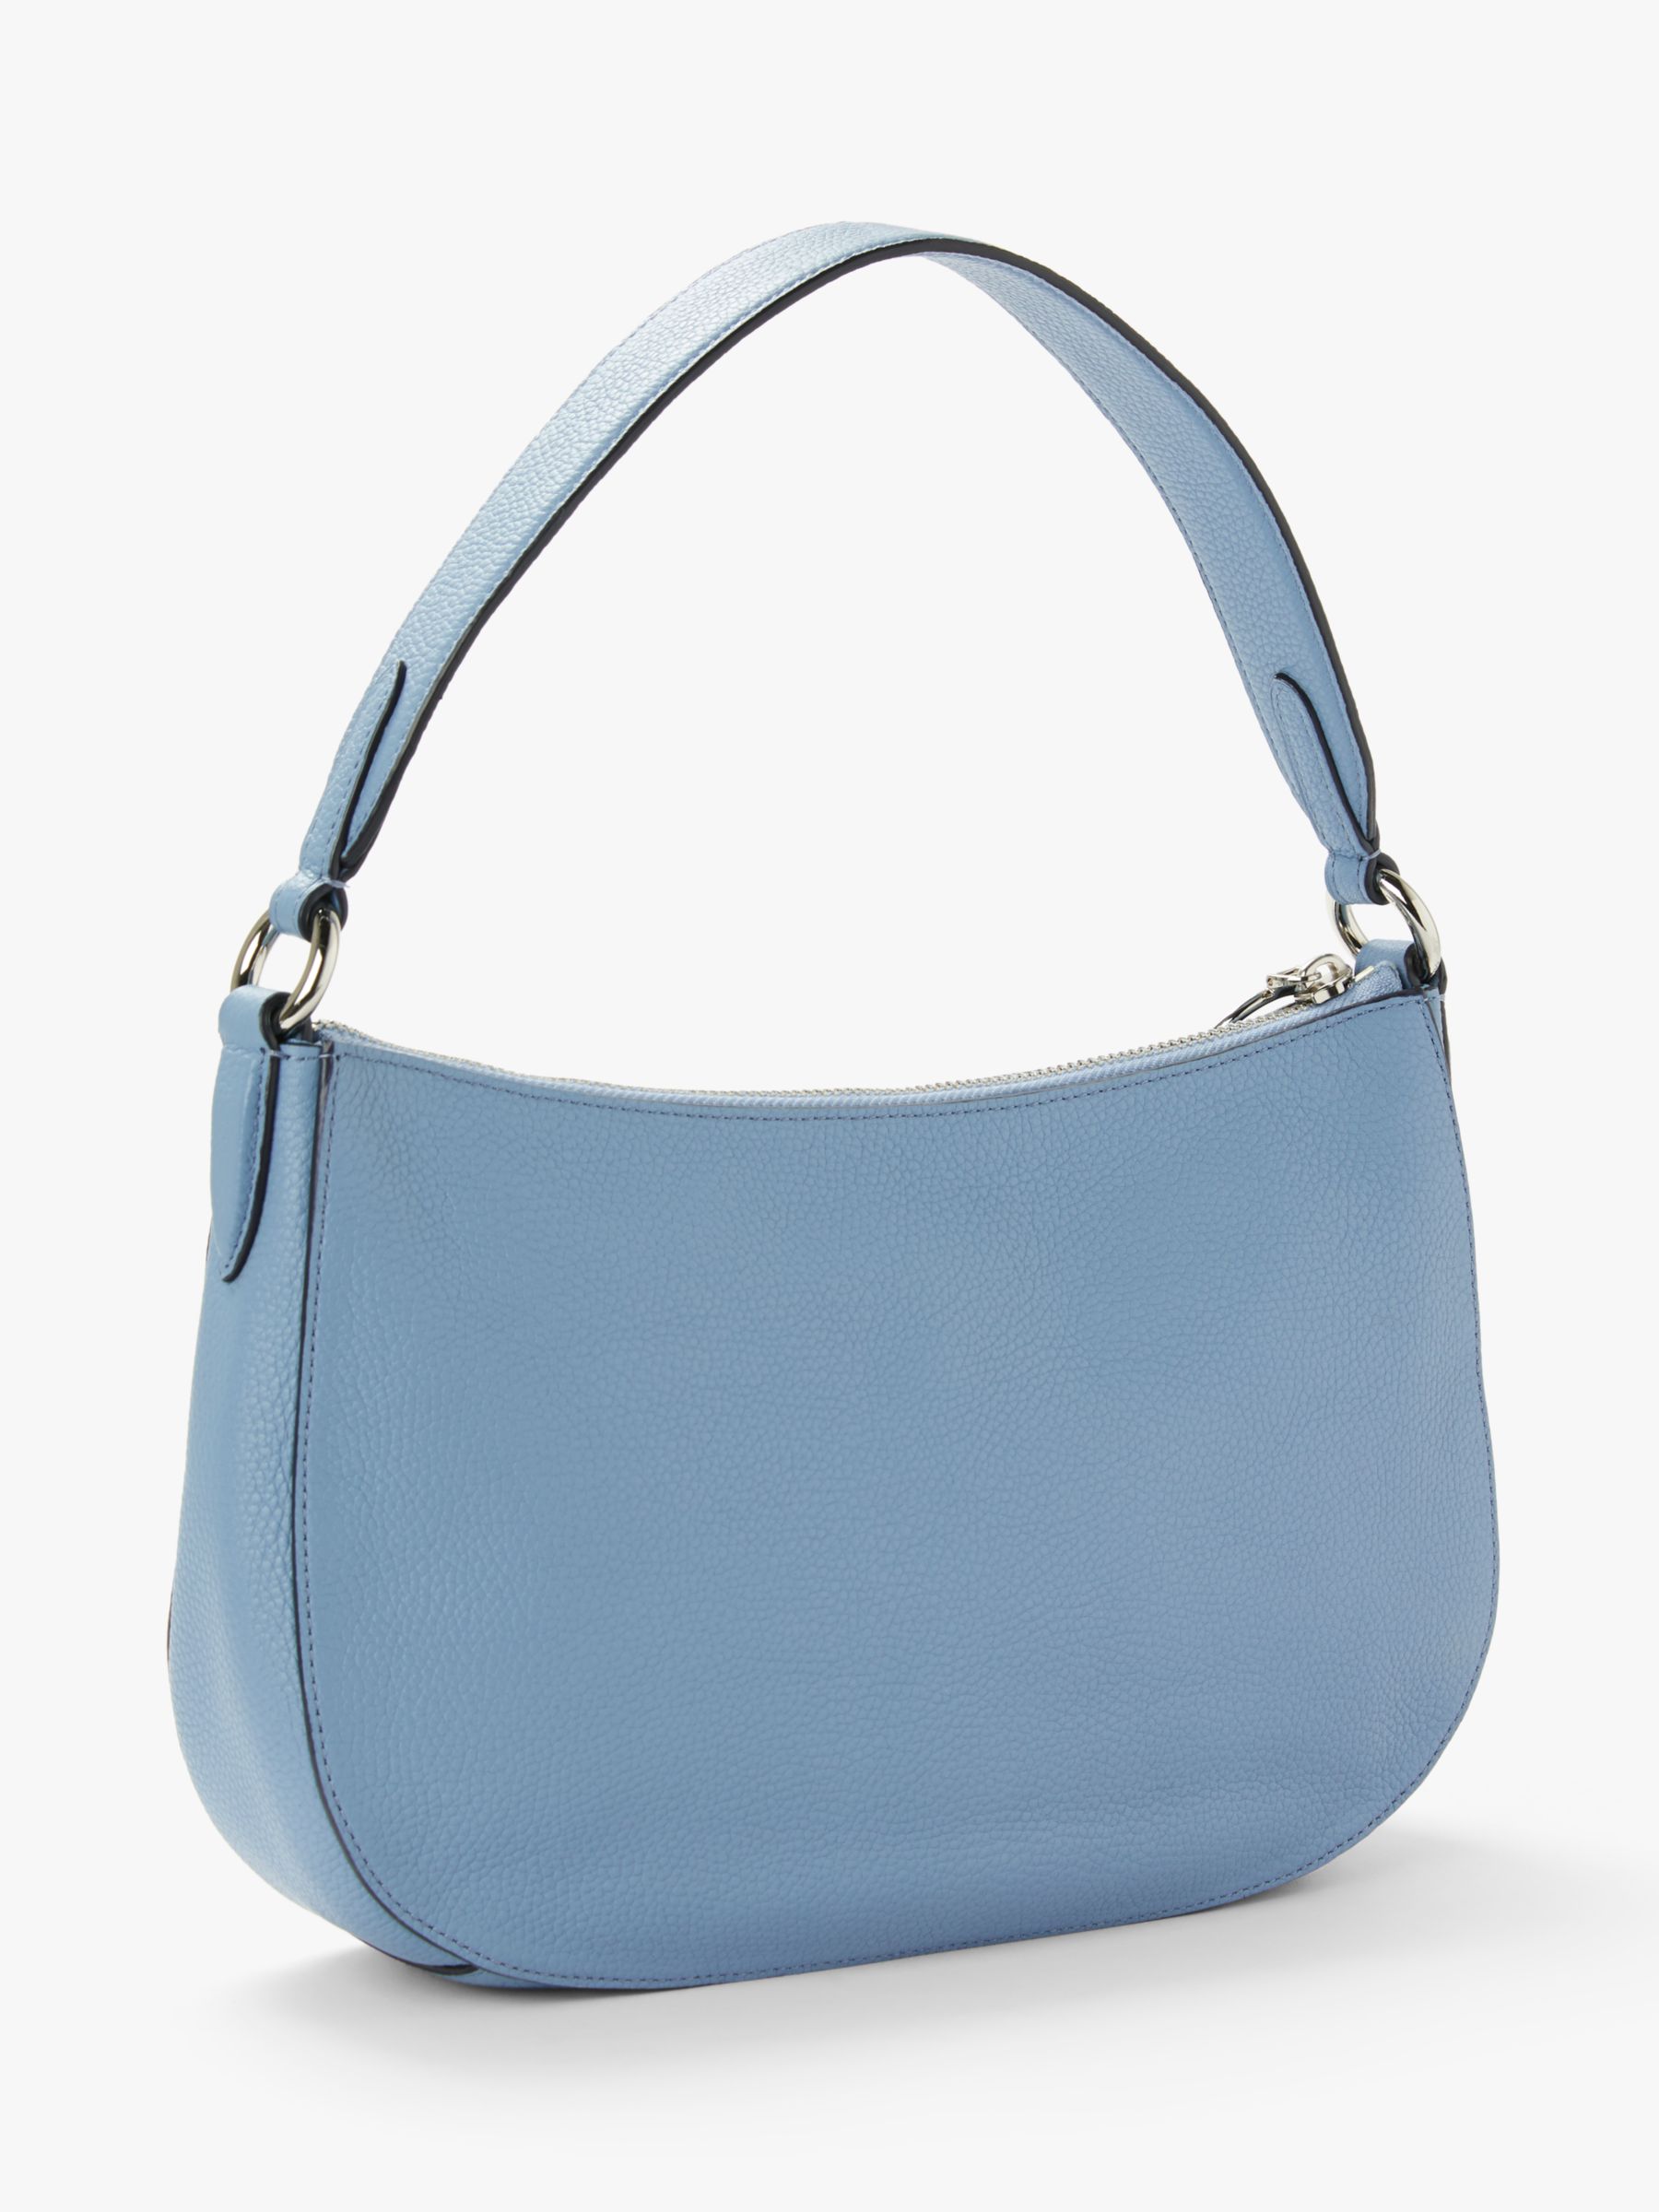 Coach Sutton Leather Cross Body Bag at John Lewis & Partners